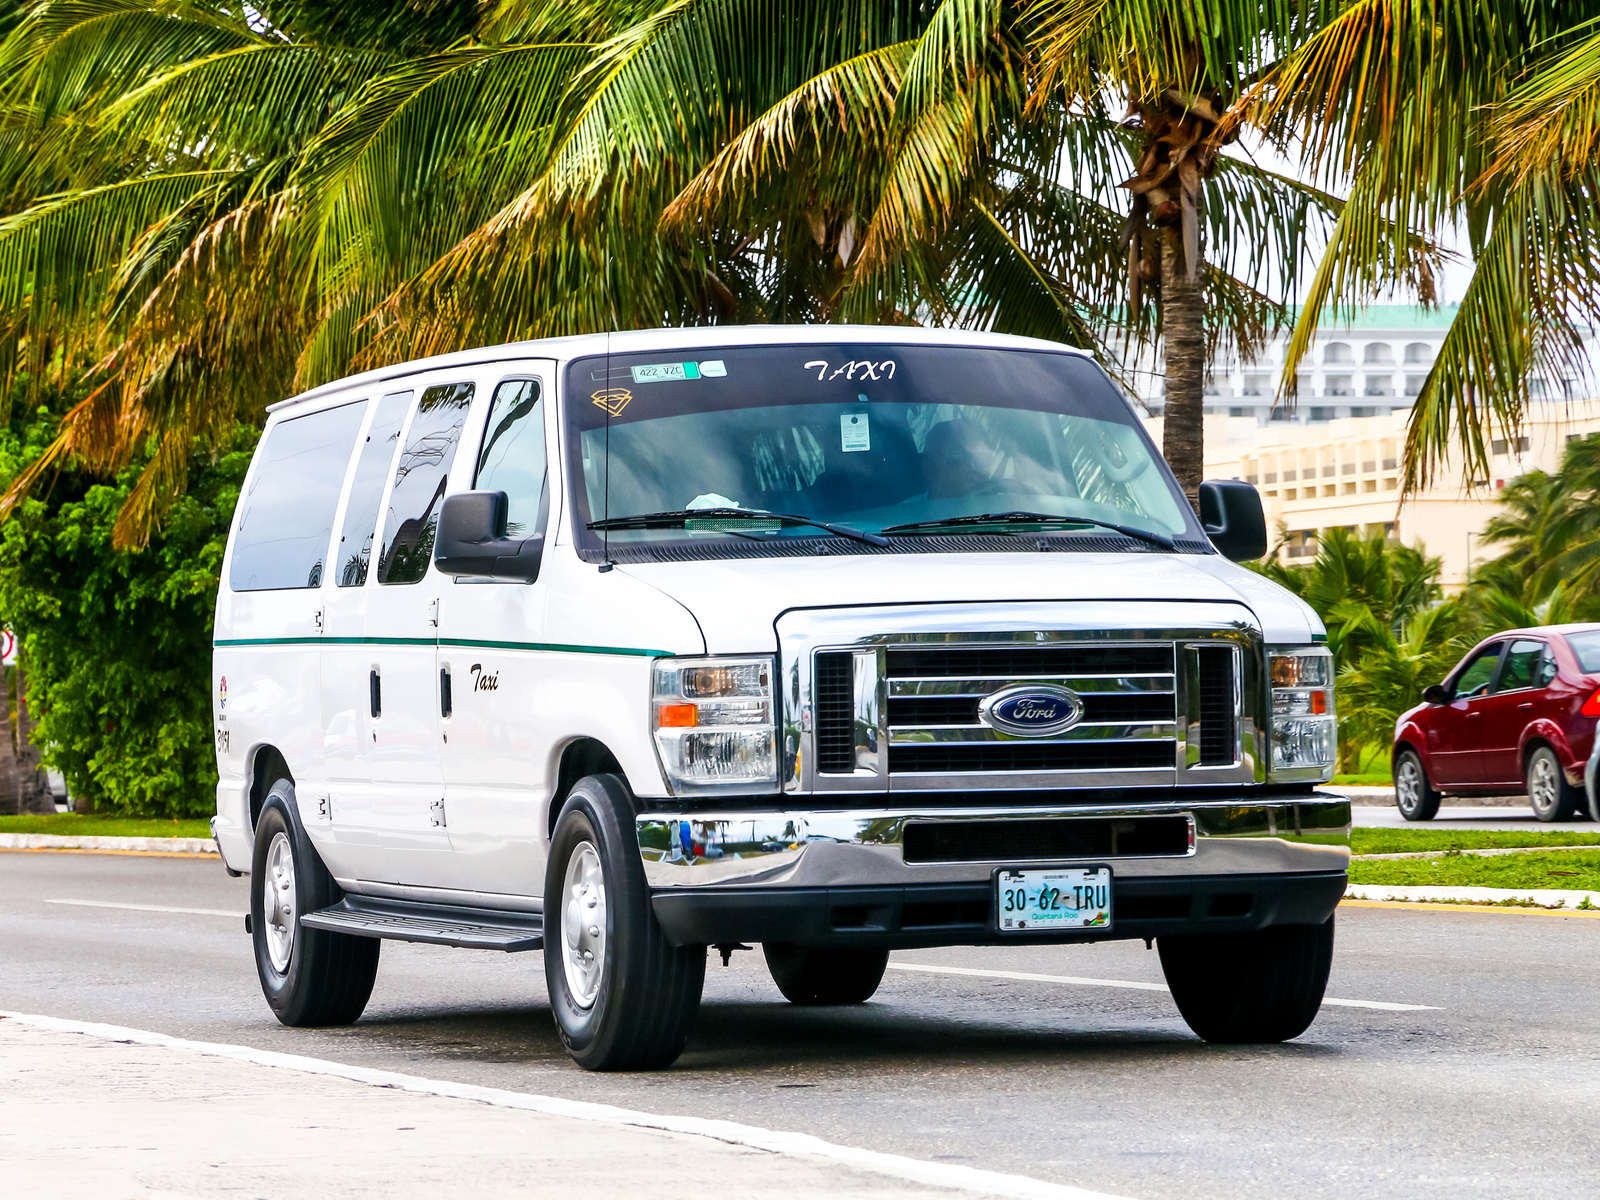 White Ford van, a taxi to take you to the best all-inclusive resorts in Cancun